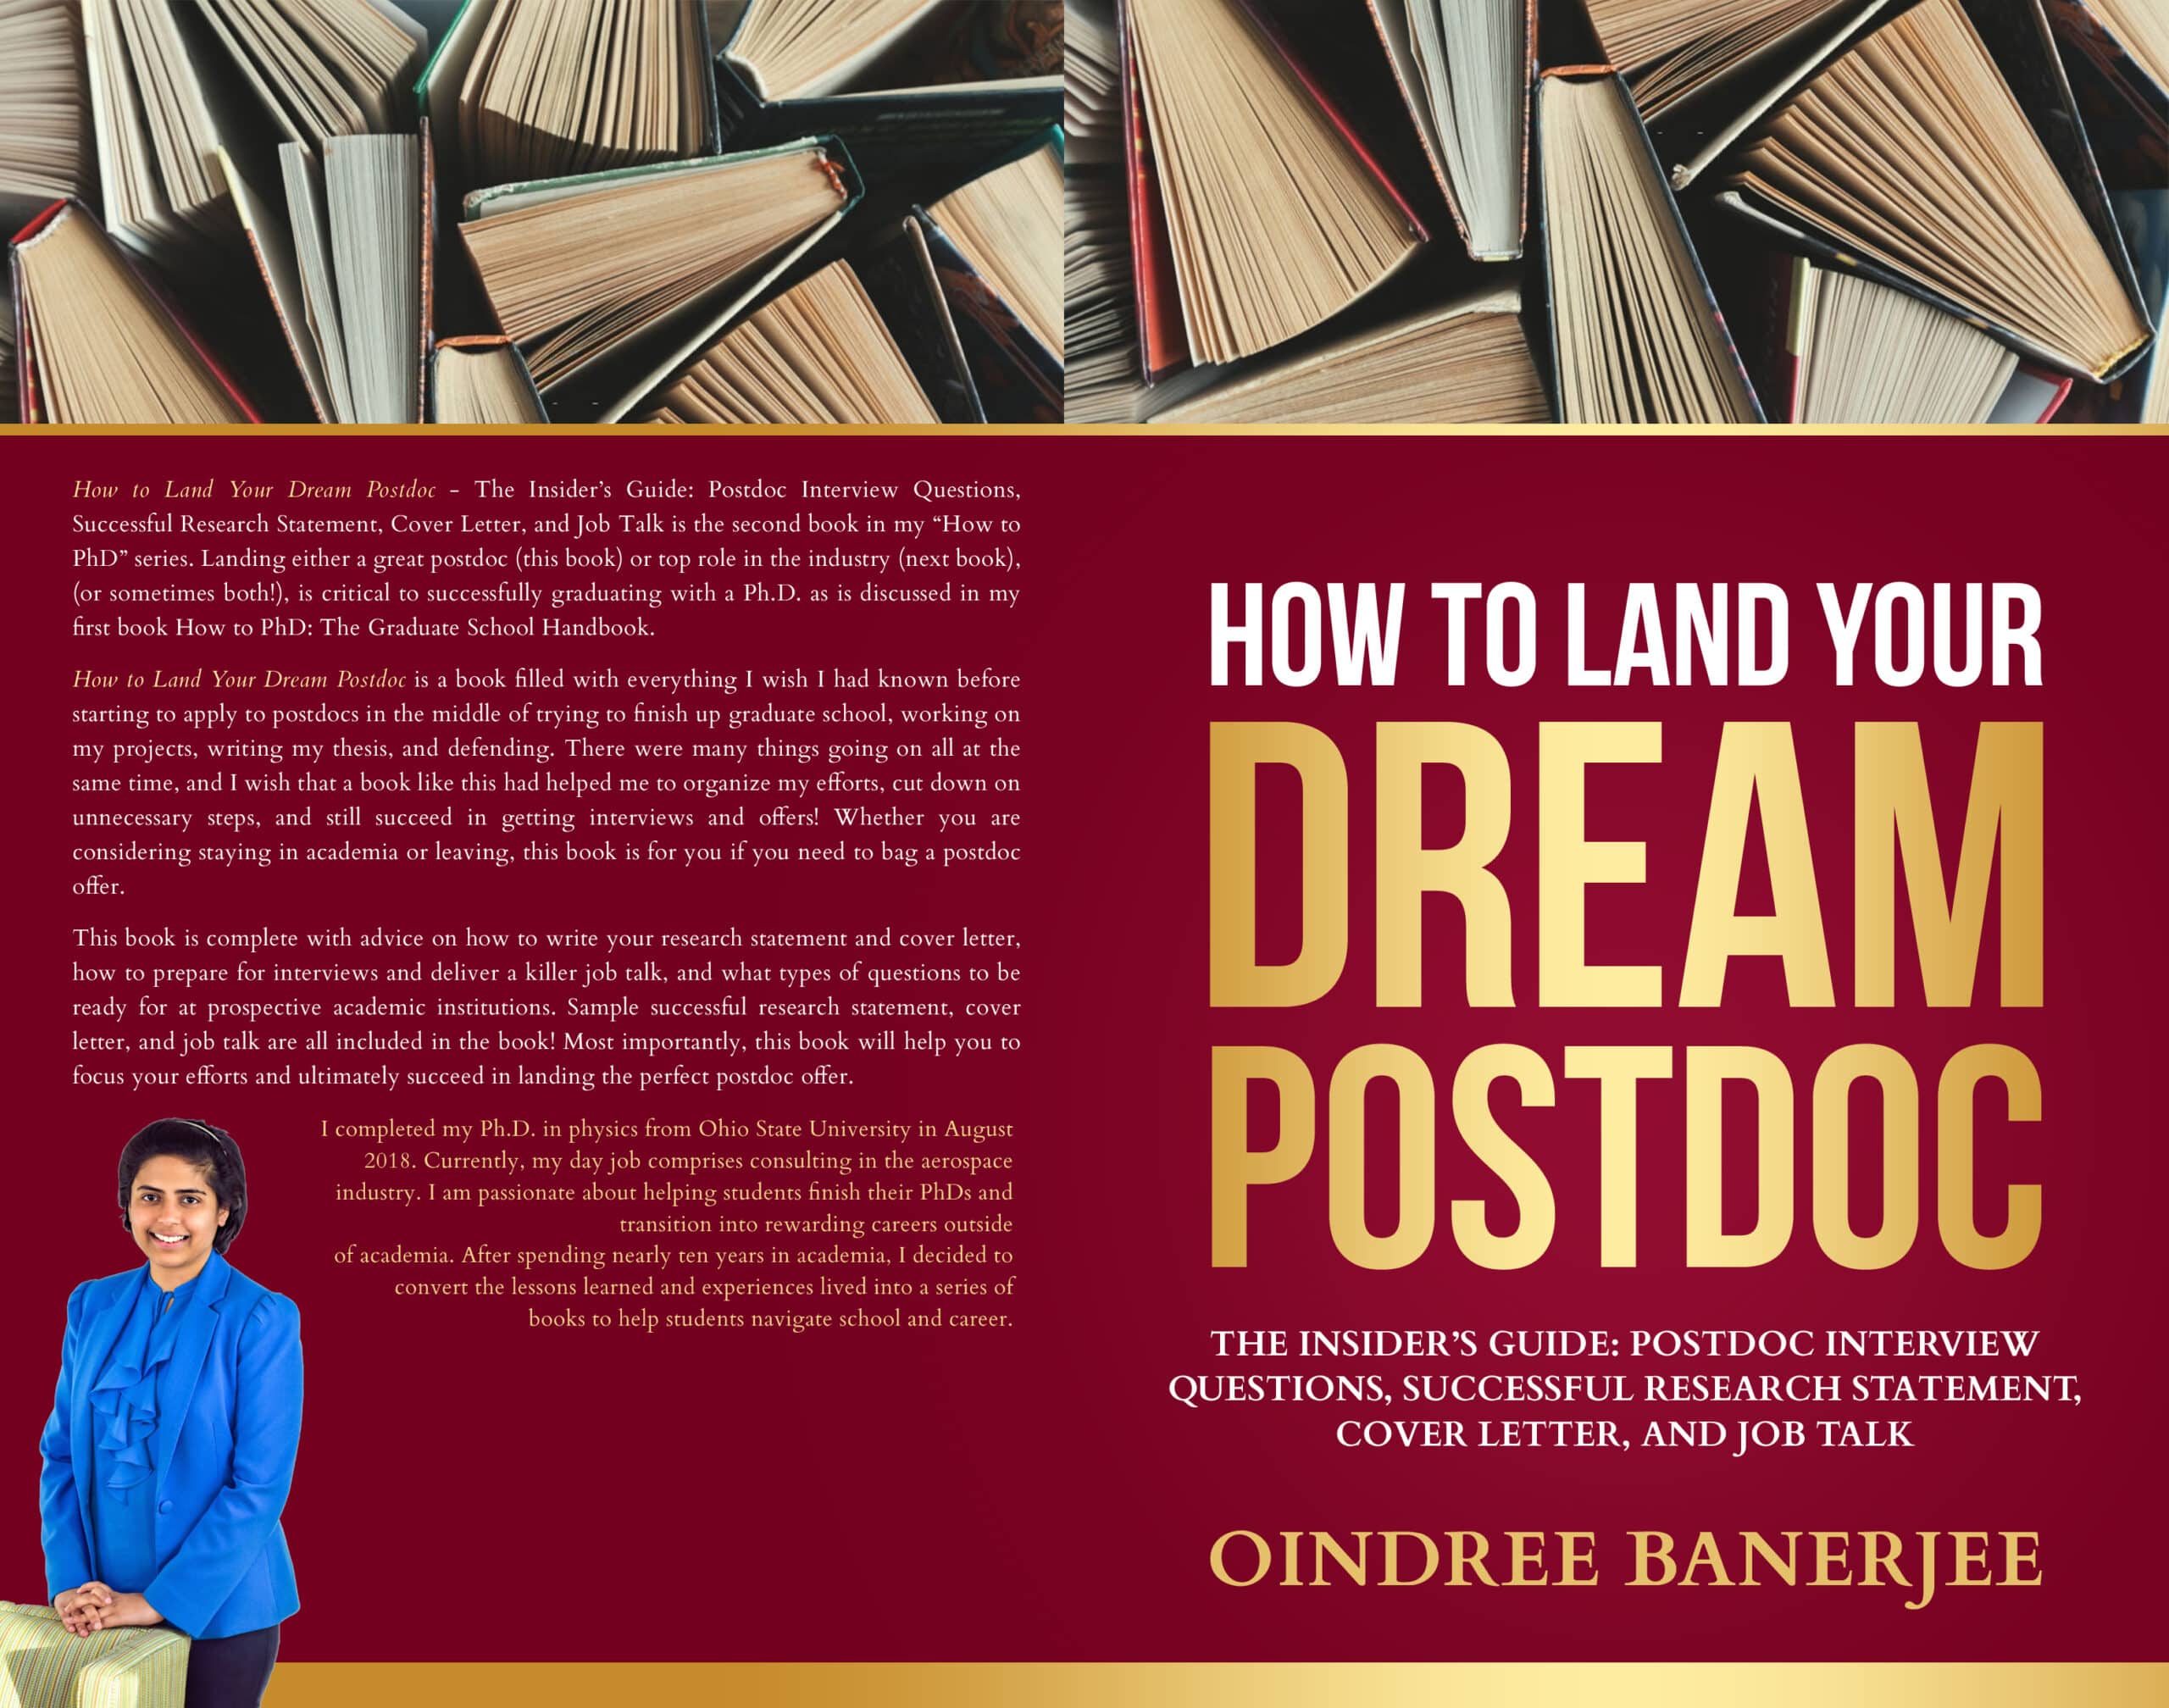 How to Postdoc Kindle Book is Free New Year's Week